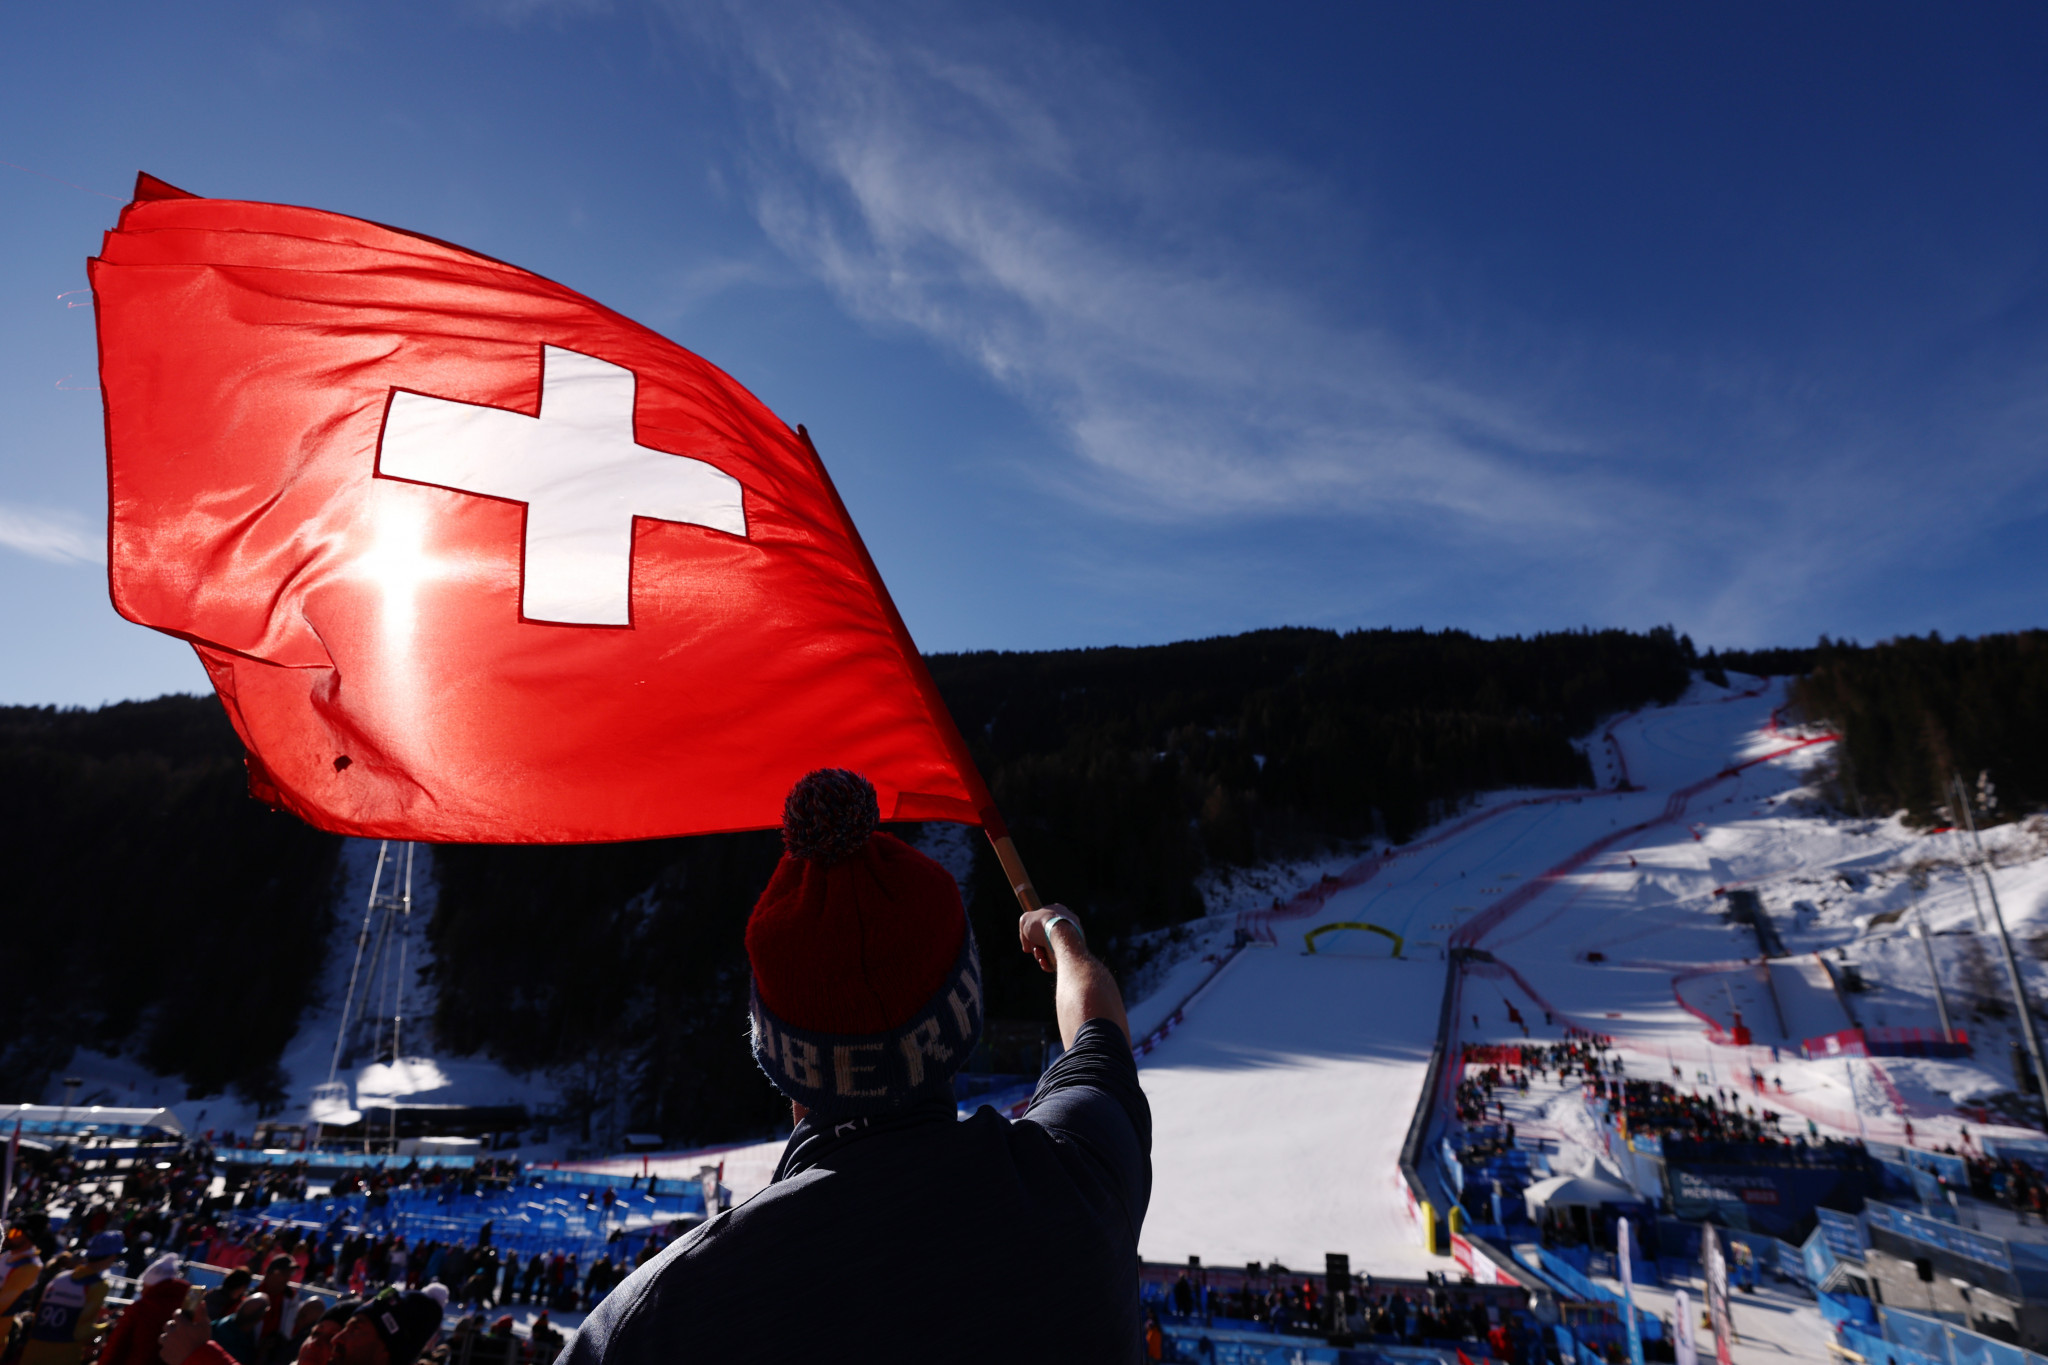 Swiss plans to be first "host country" of future Winter Olympics backed by study